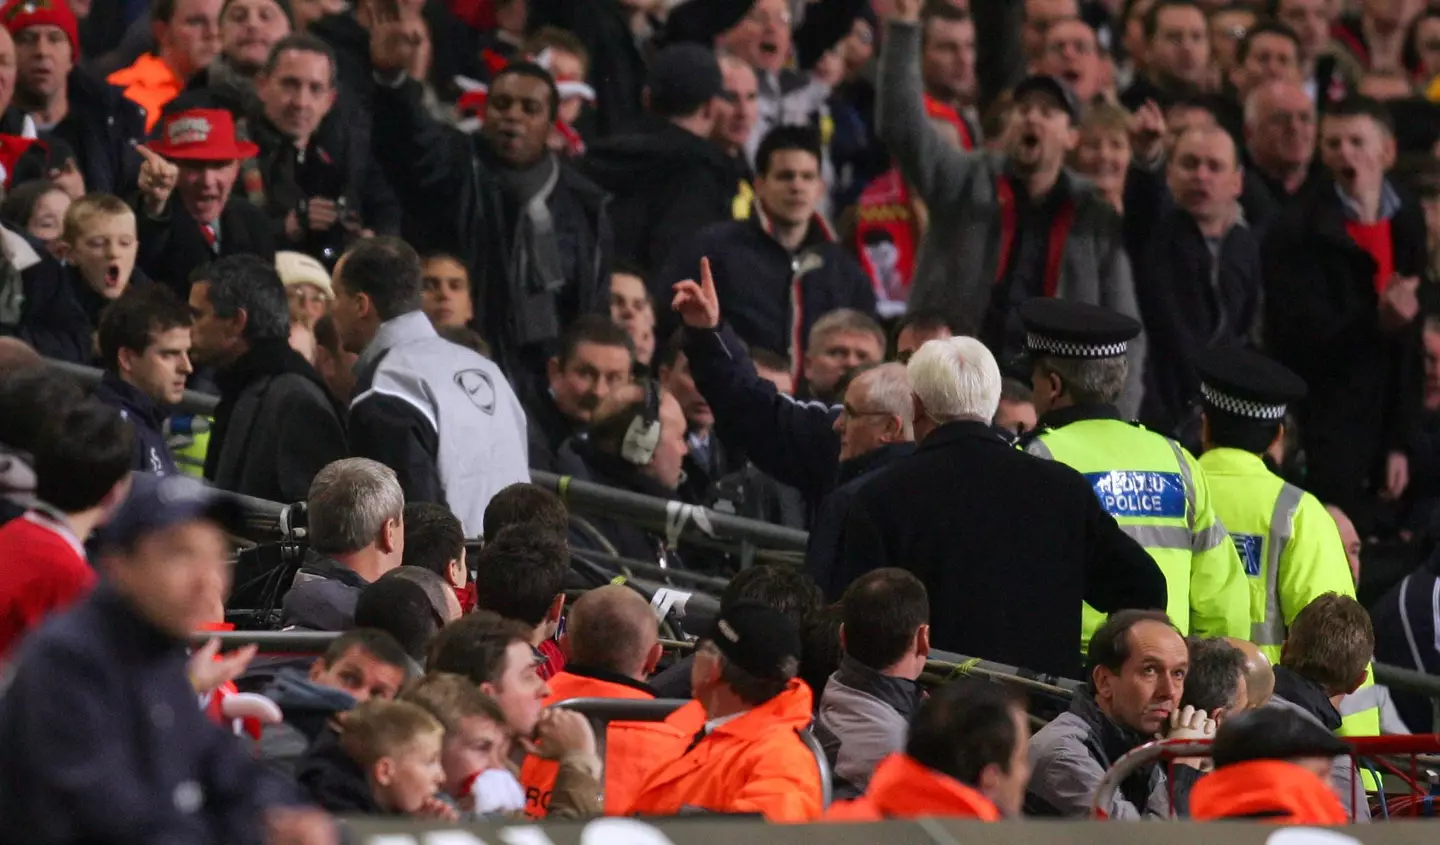 Liverpool fans berate Mourinho after he is set to the stands (Image: PA)